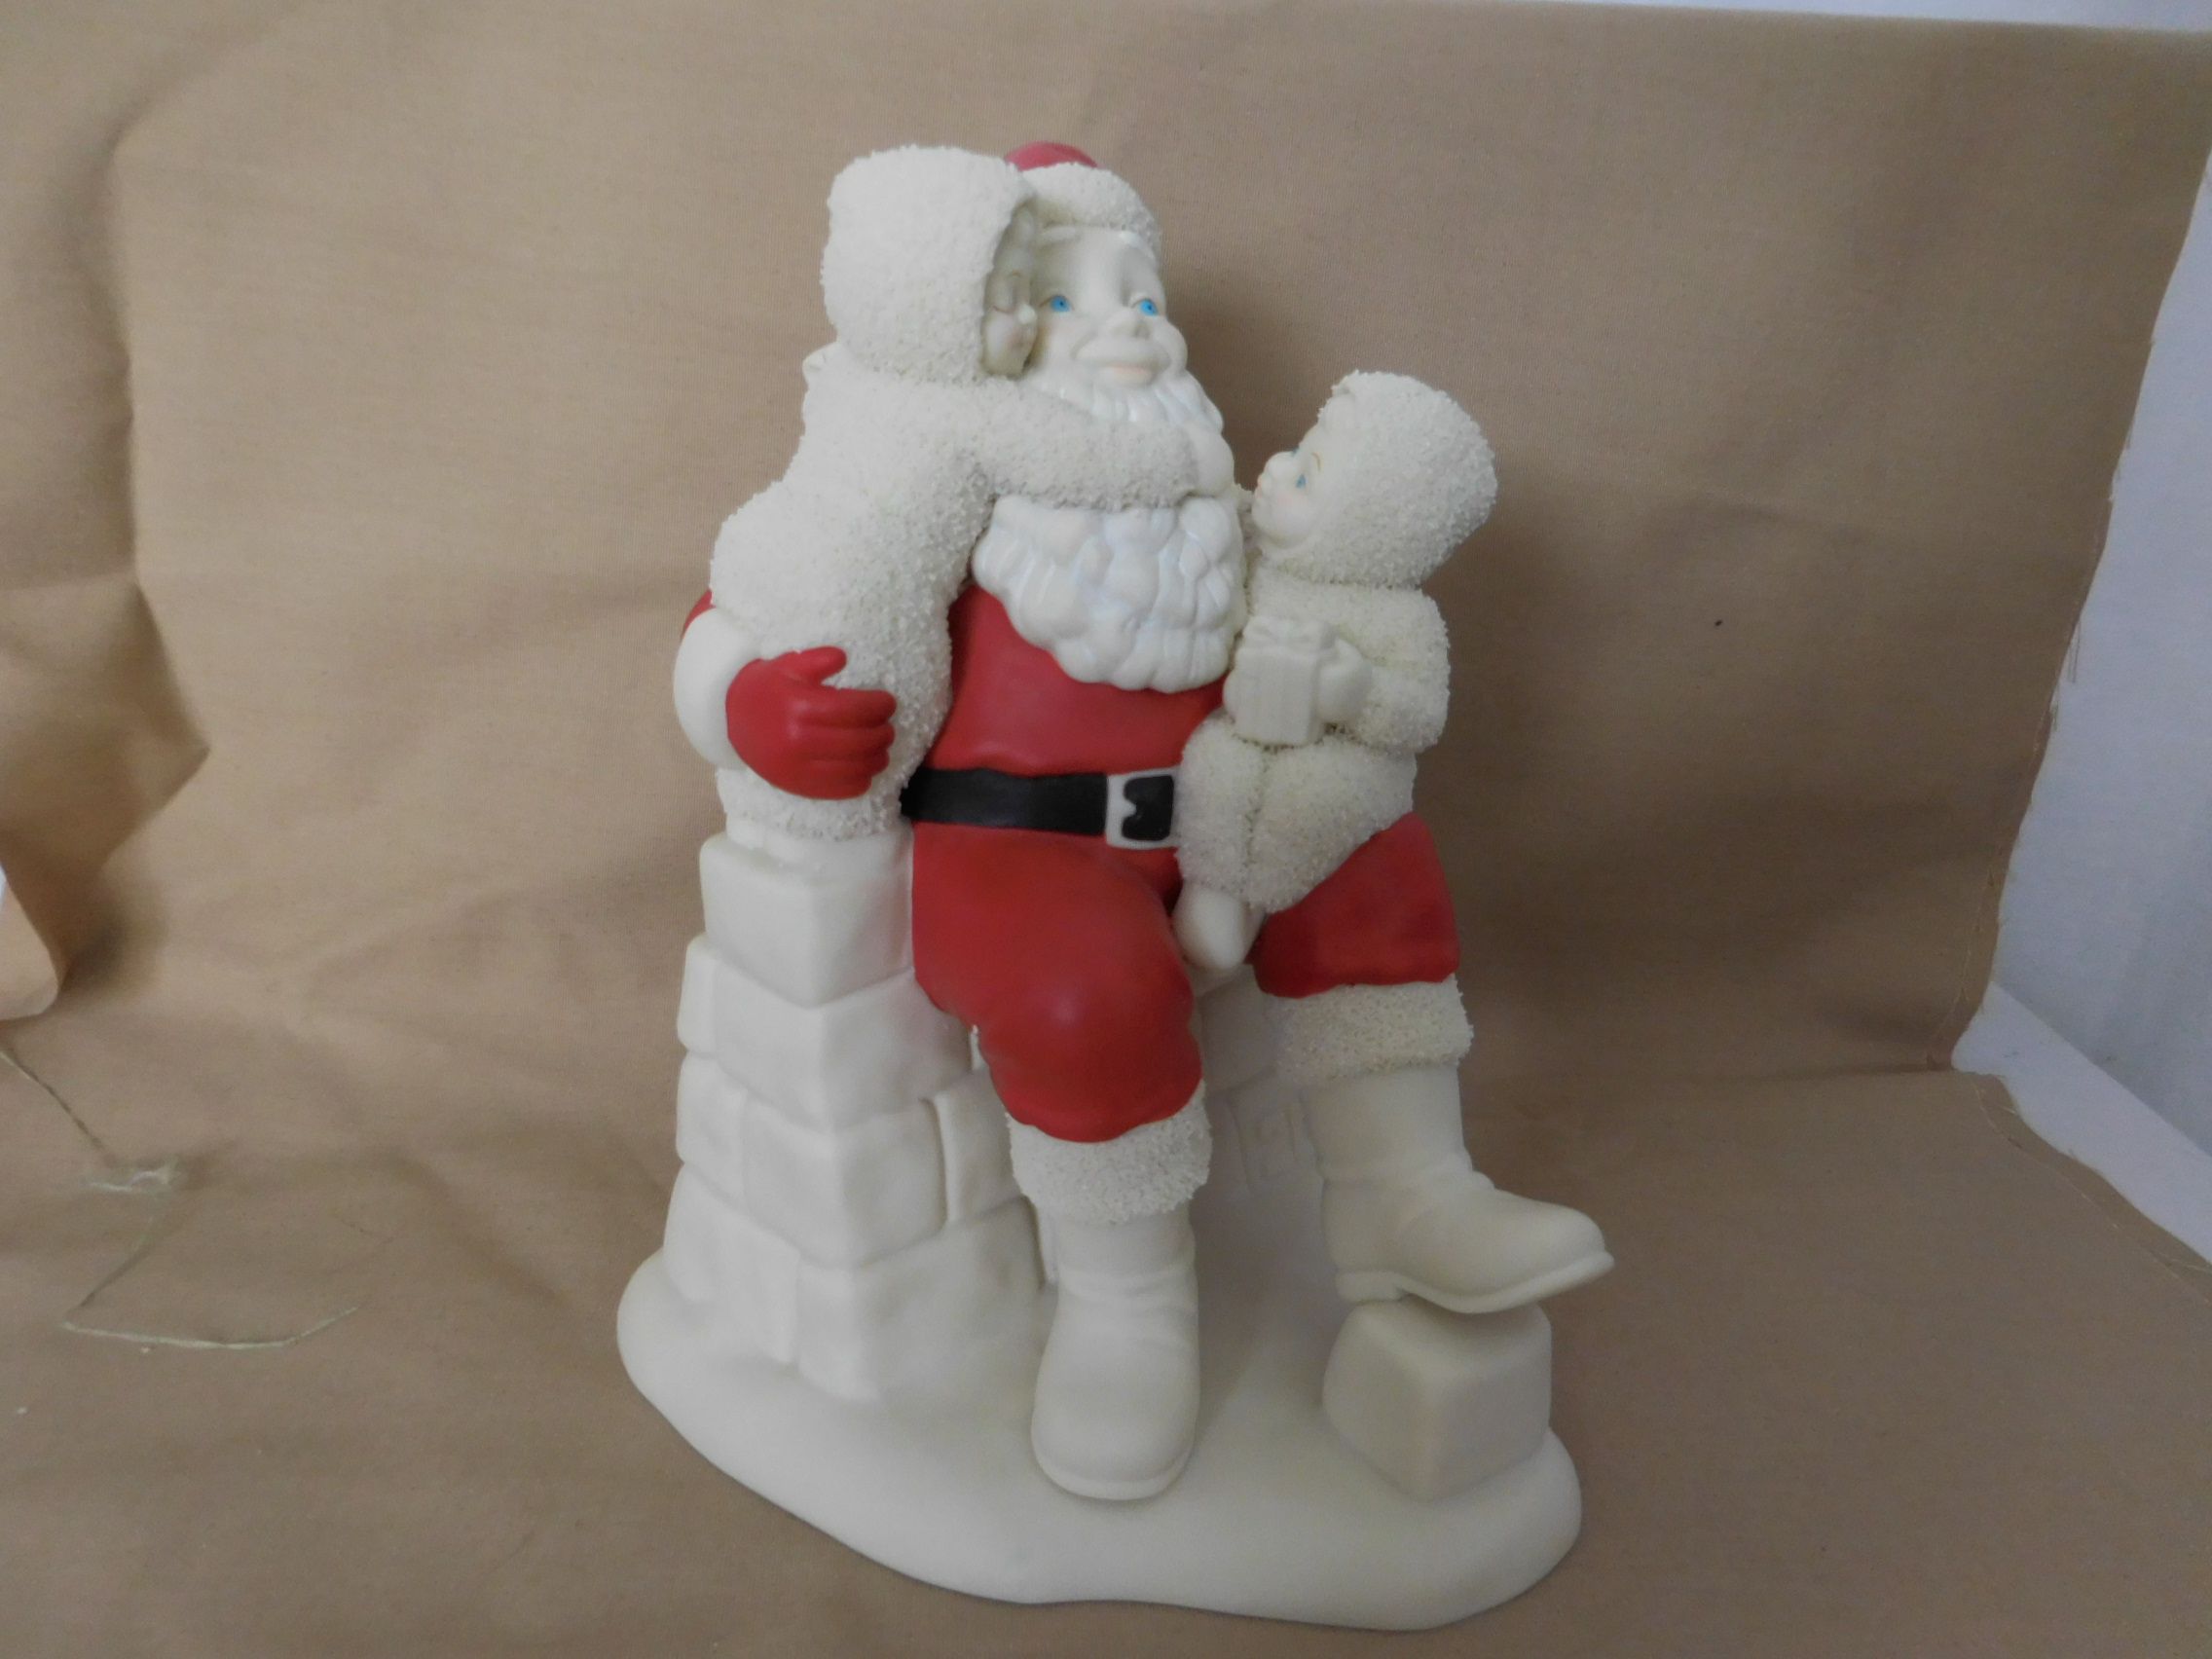 Snowbabies Dept 56 The Guest Collection 2001 Santa "and we've been Really Good" , plus box sorry not pictured